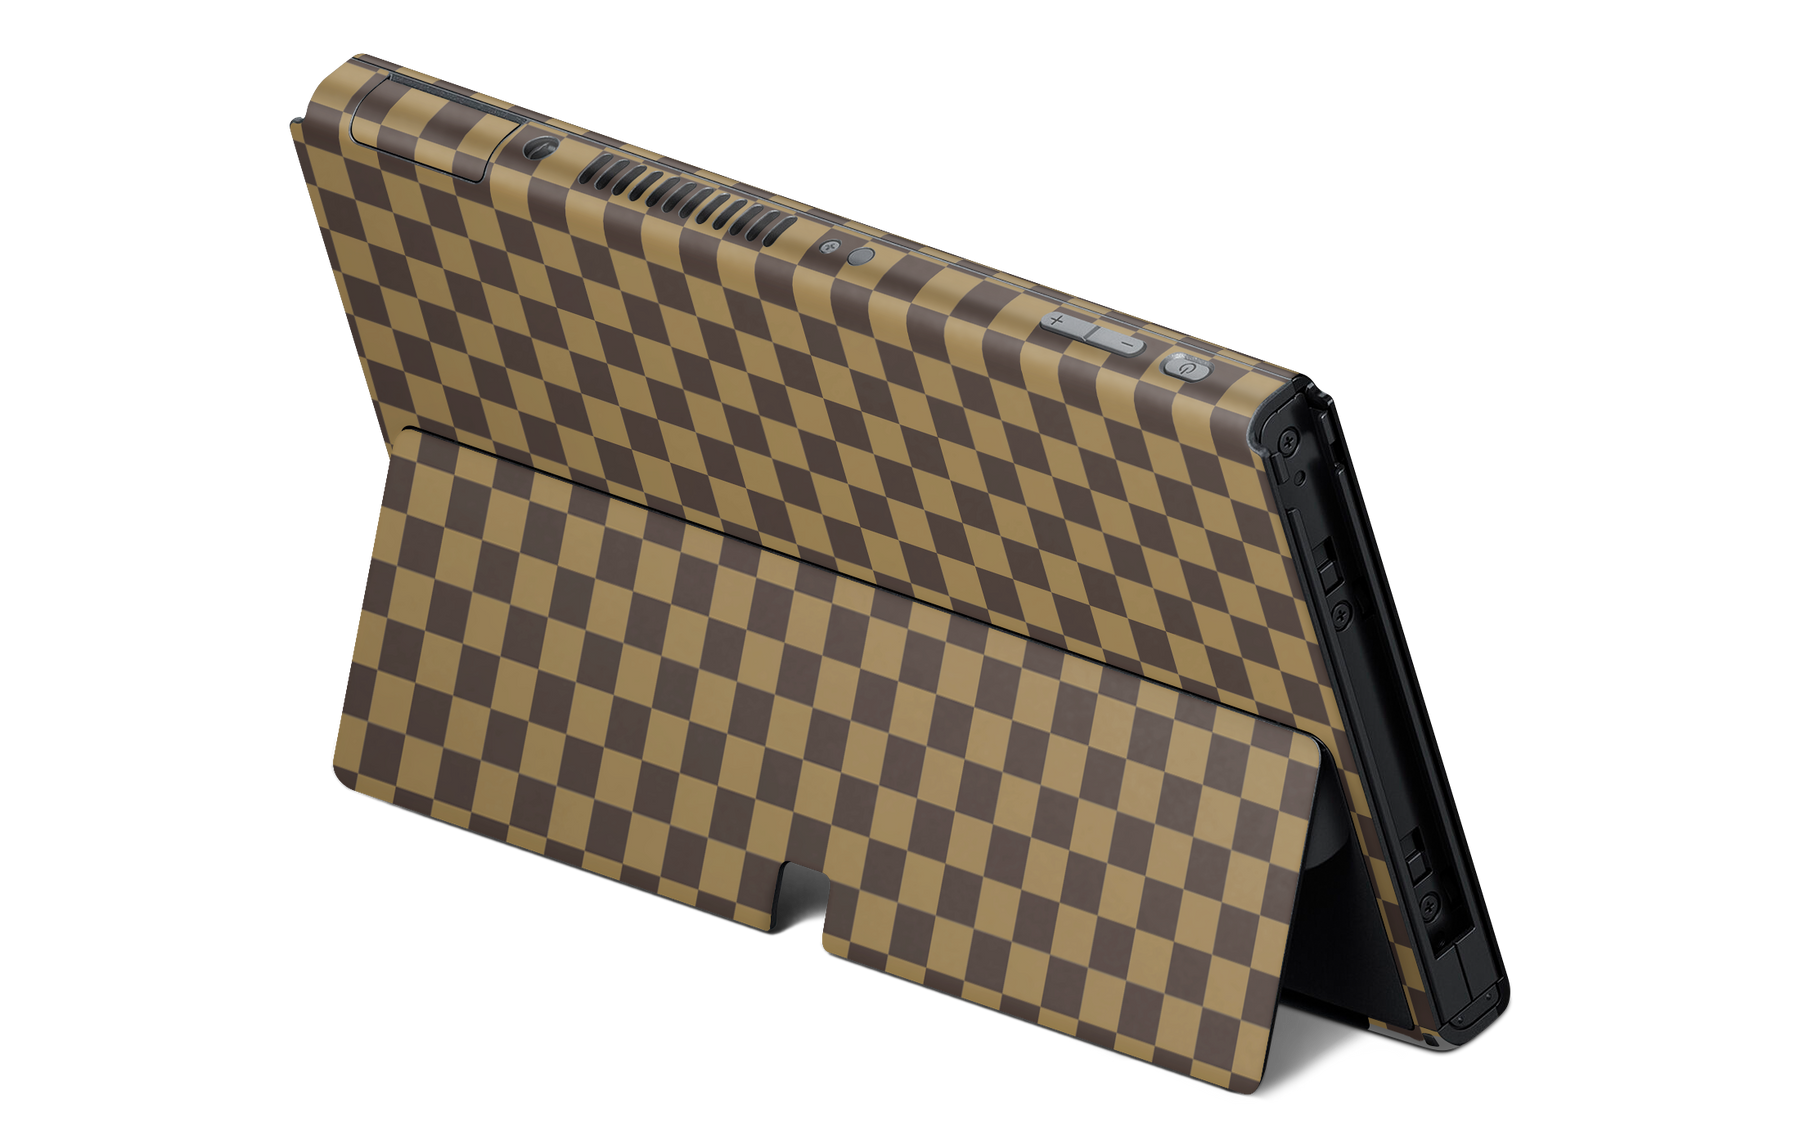 Nintendo Switch OLED Checkers brown